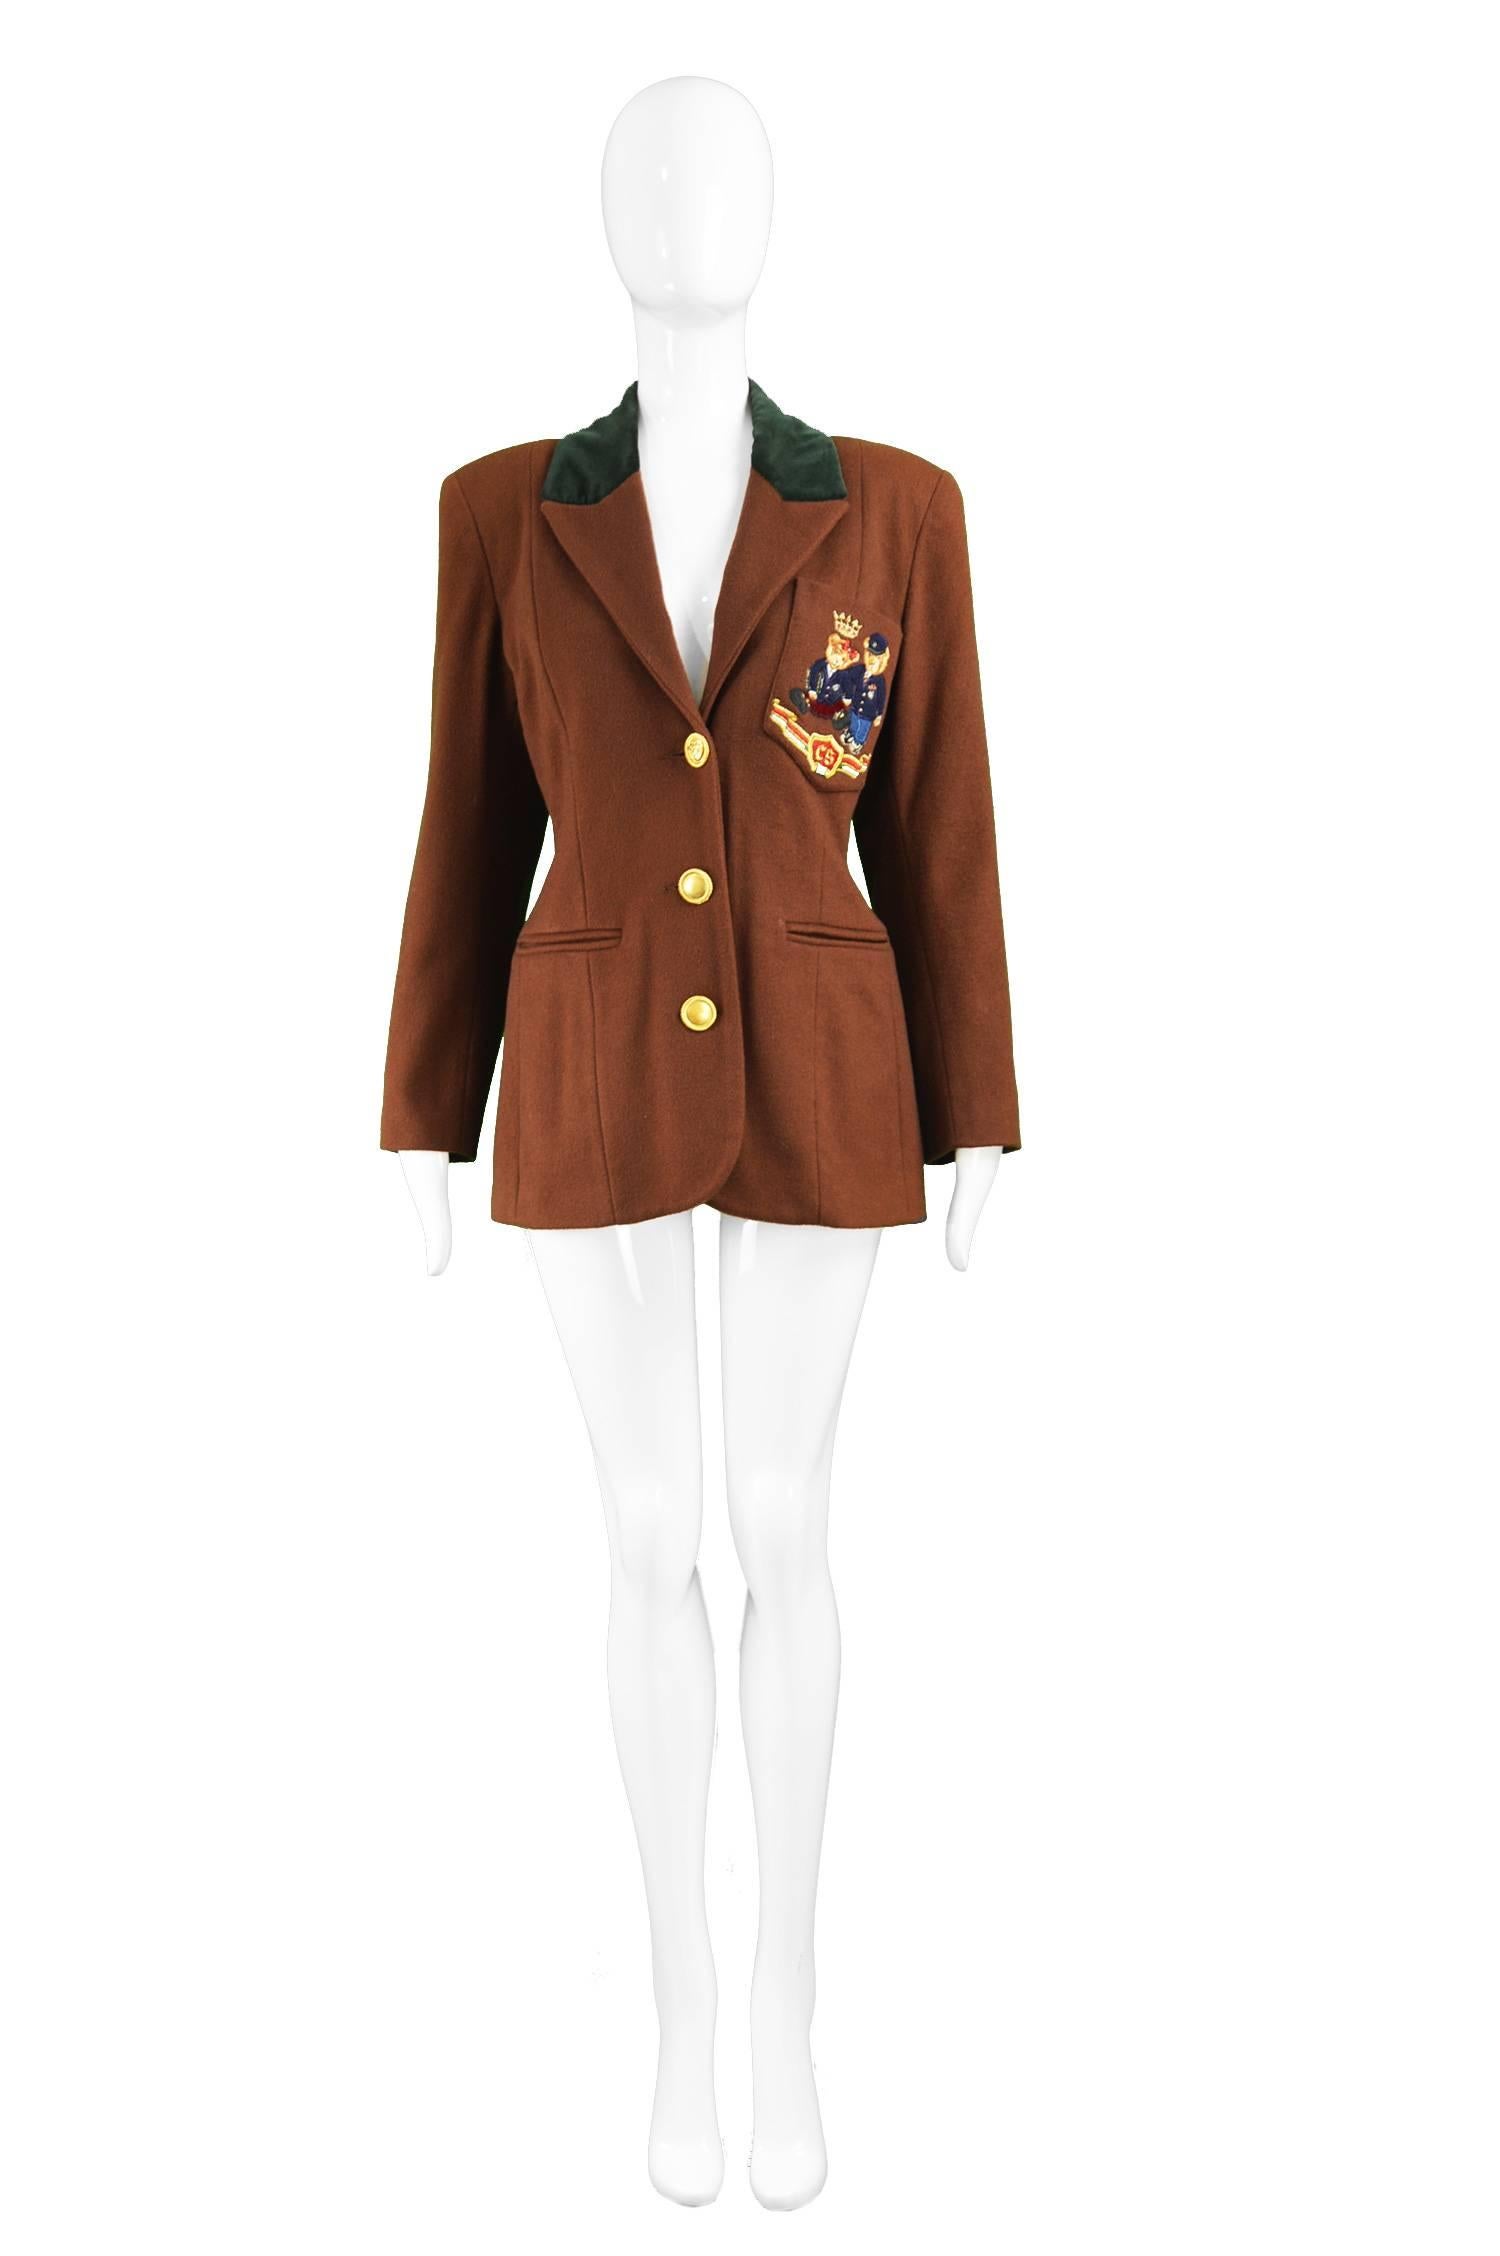 Cristina Santandrea Embroidered Bear Brown Wool & Cashmere Blazer, 1990s

Estimated Size: UK 10/ US 6/ EU 38. Please check measurements. 
Bust - 36” / 91cm (allow a couple of inches room for movement)
Waist - 34” / 86cm 
Length (Shoulder to Hem)